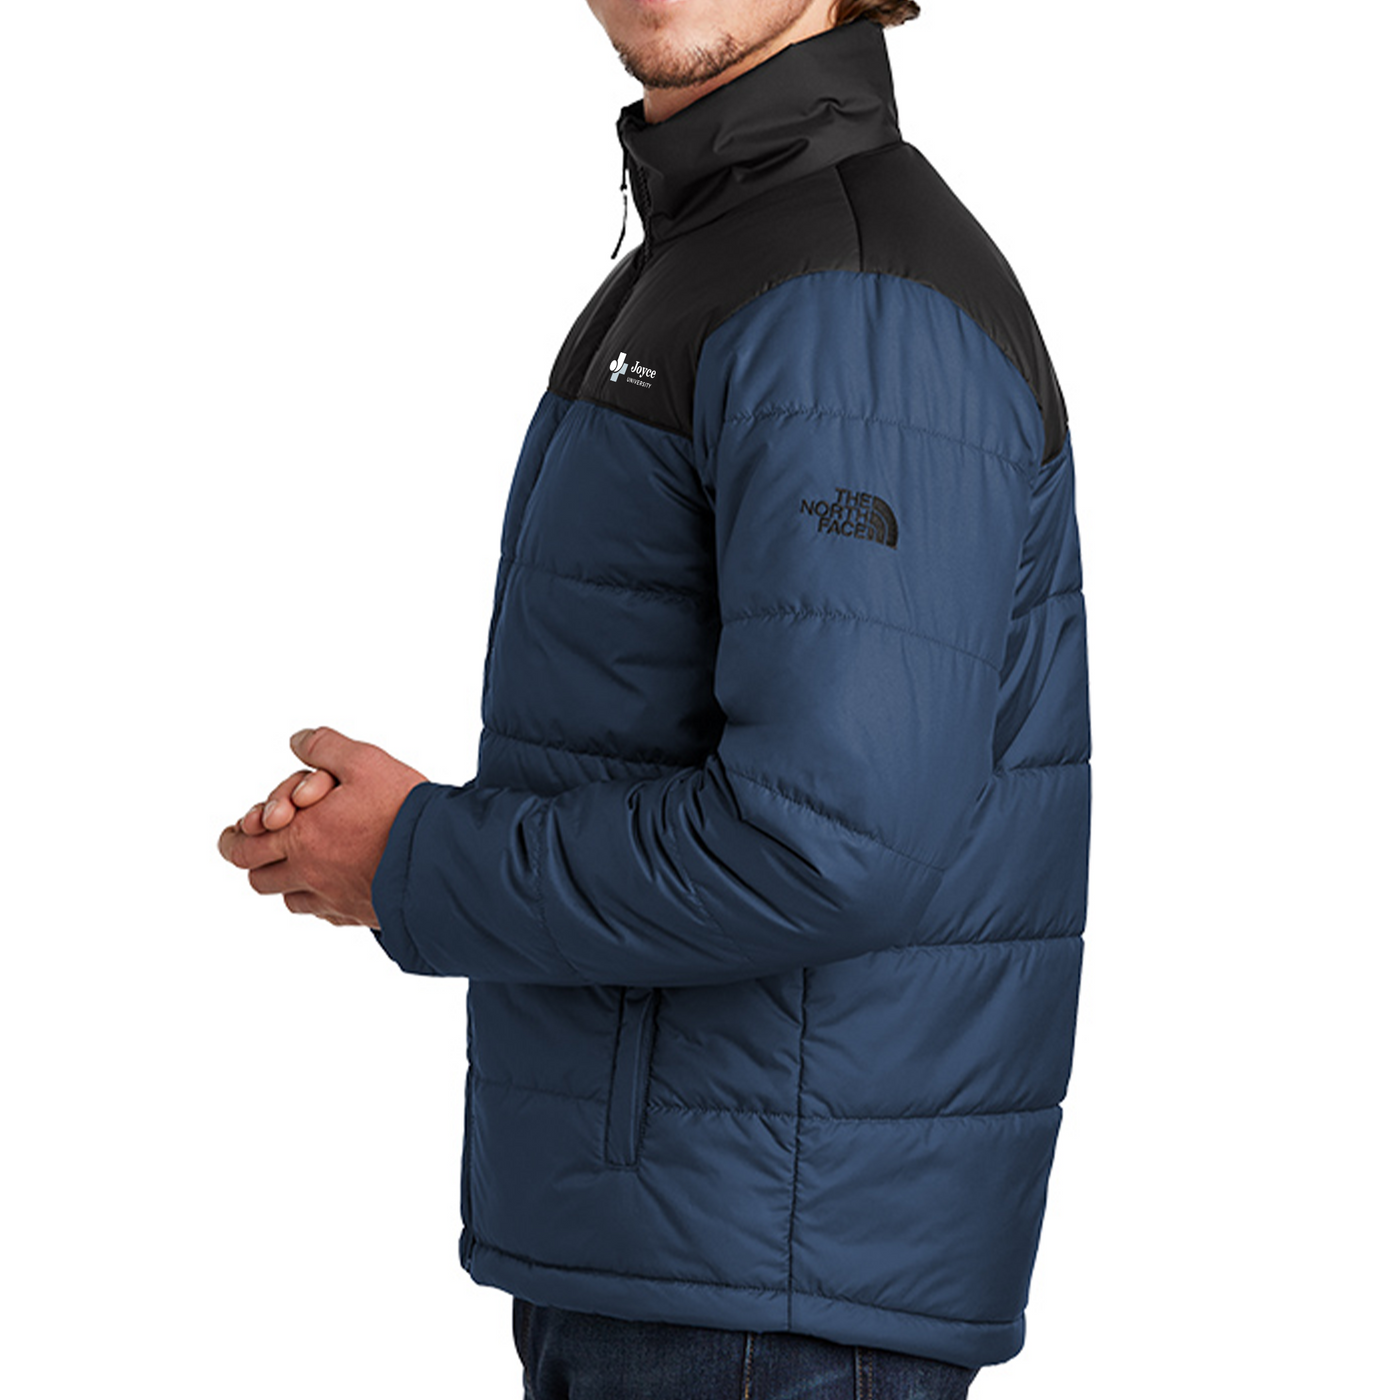 The North Face® Everyday Insulated Jacket